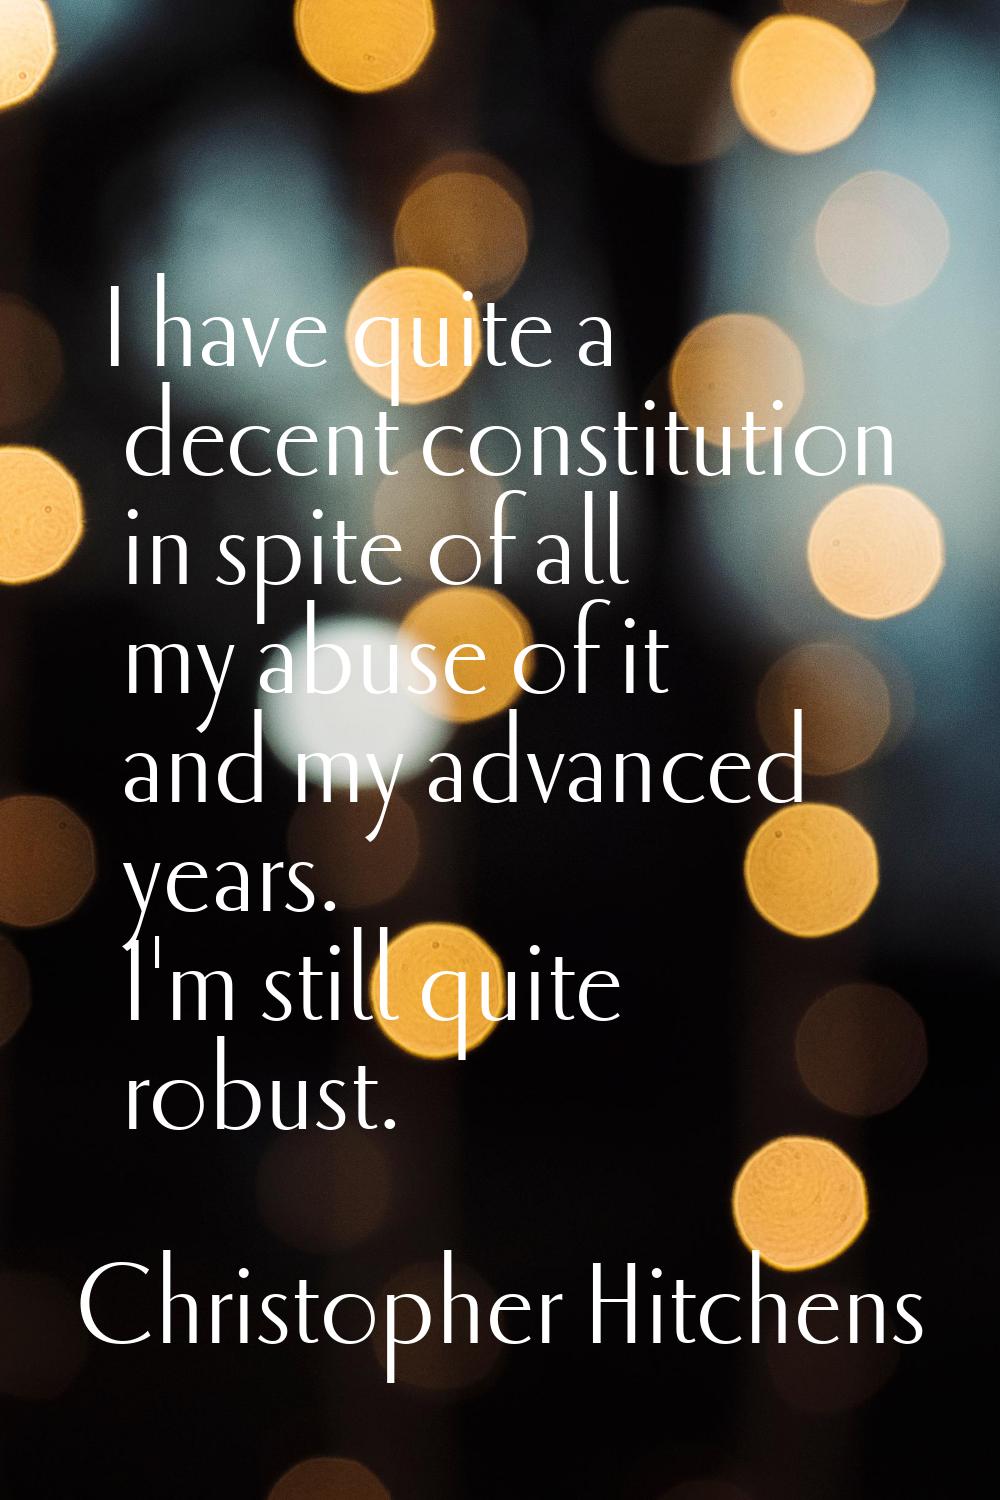 I have quite a decent constitution in spite of all my abuse of it and my advanced years. I'm still 